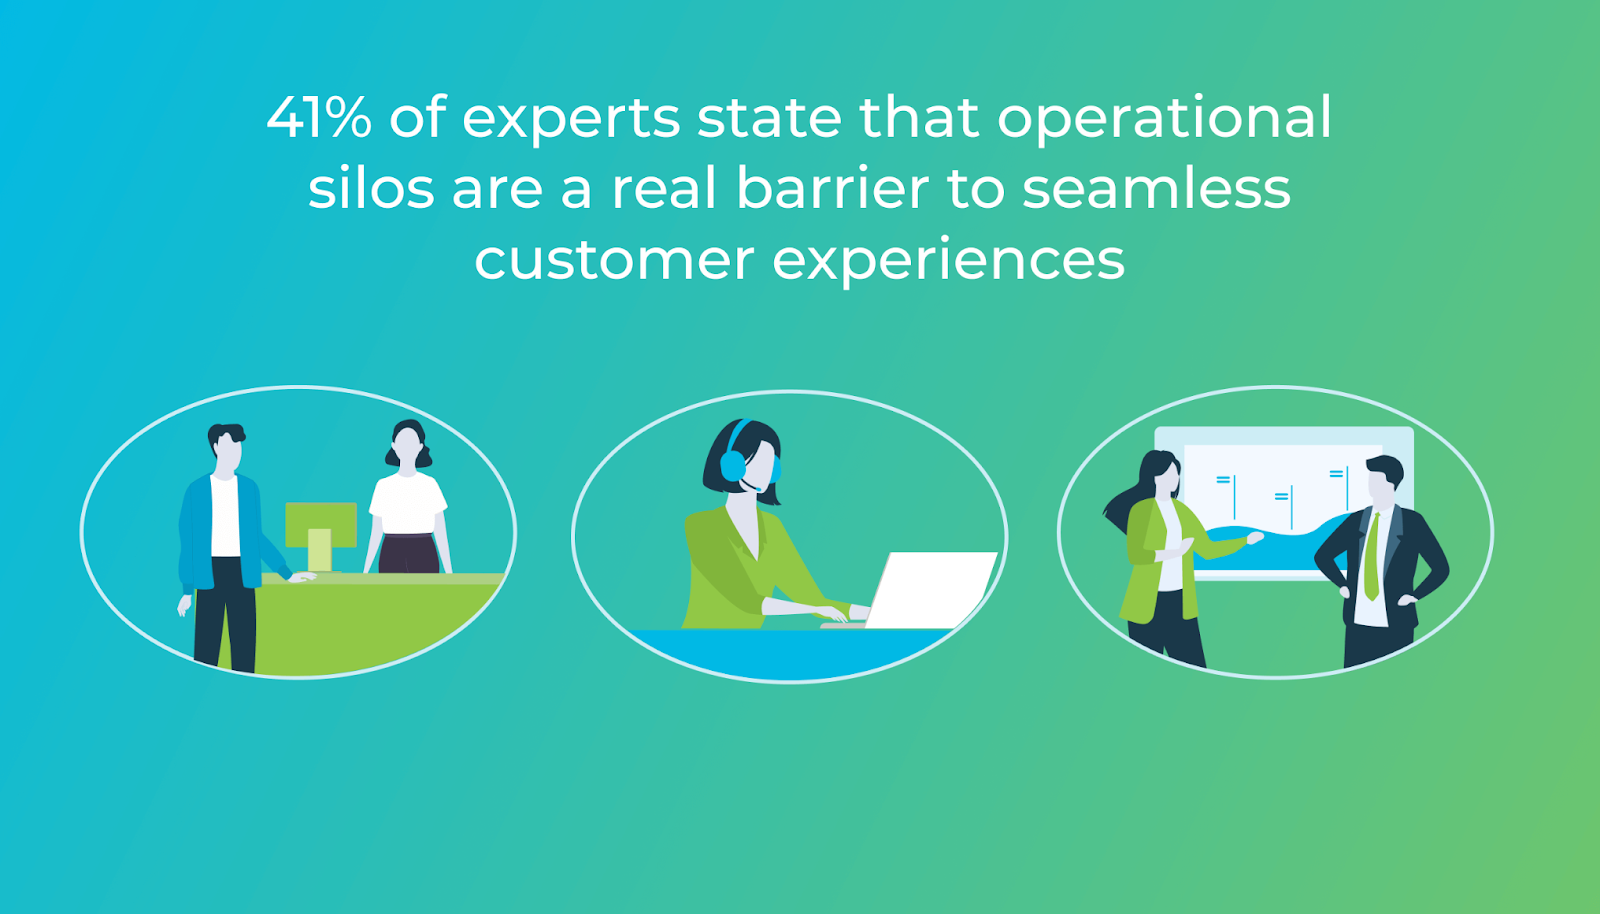 The impact of operational silos on customer experience